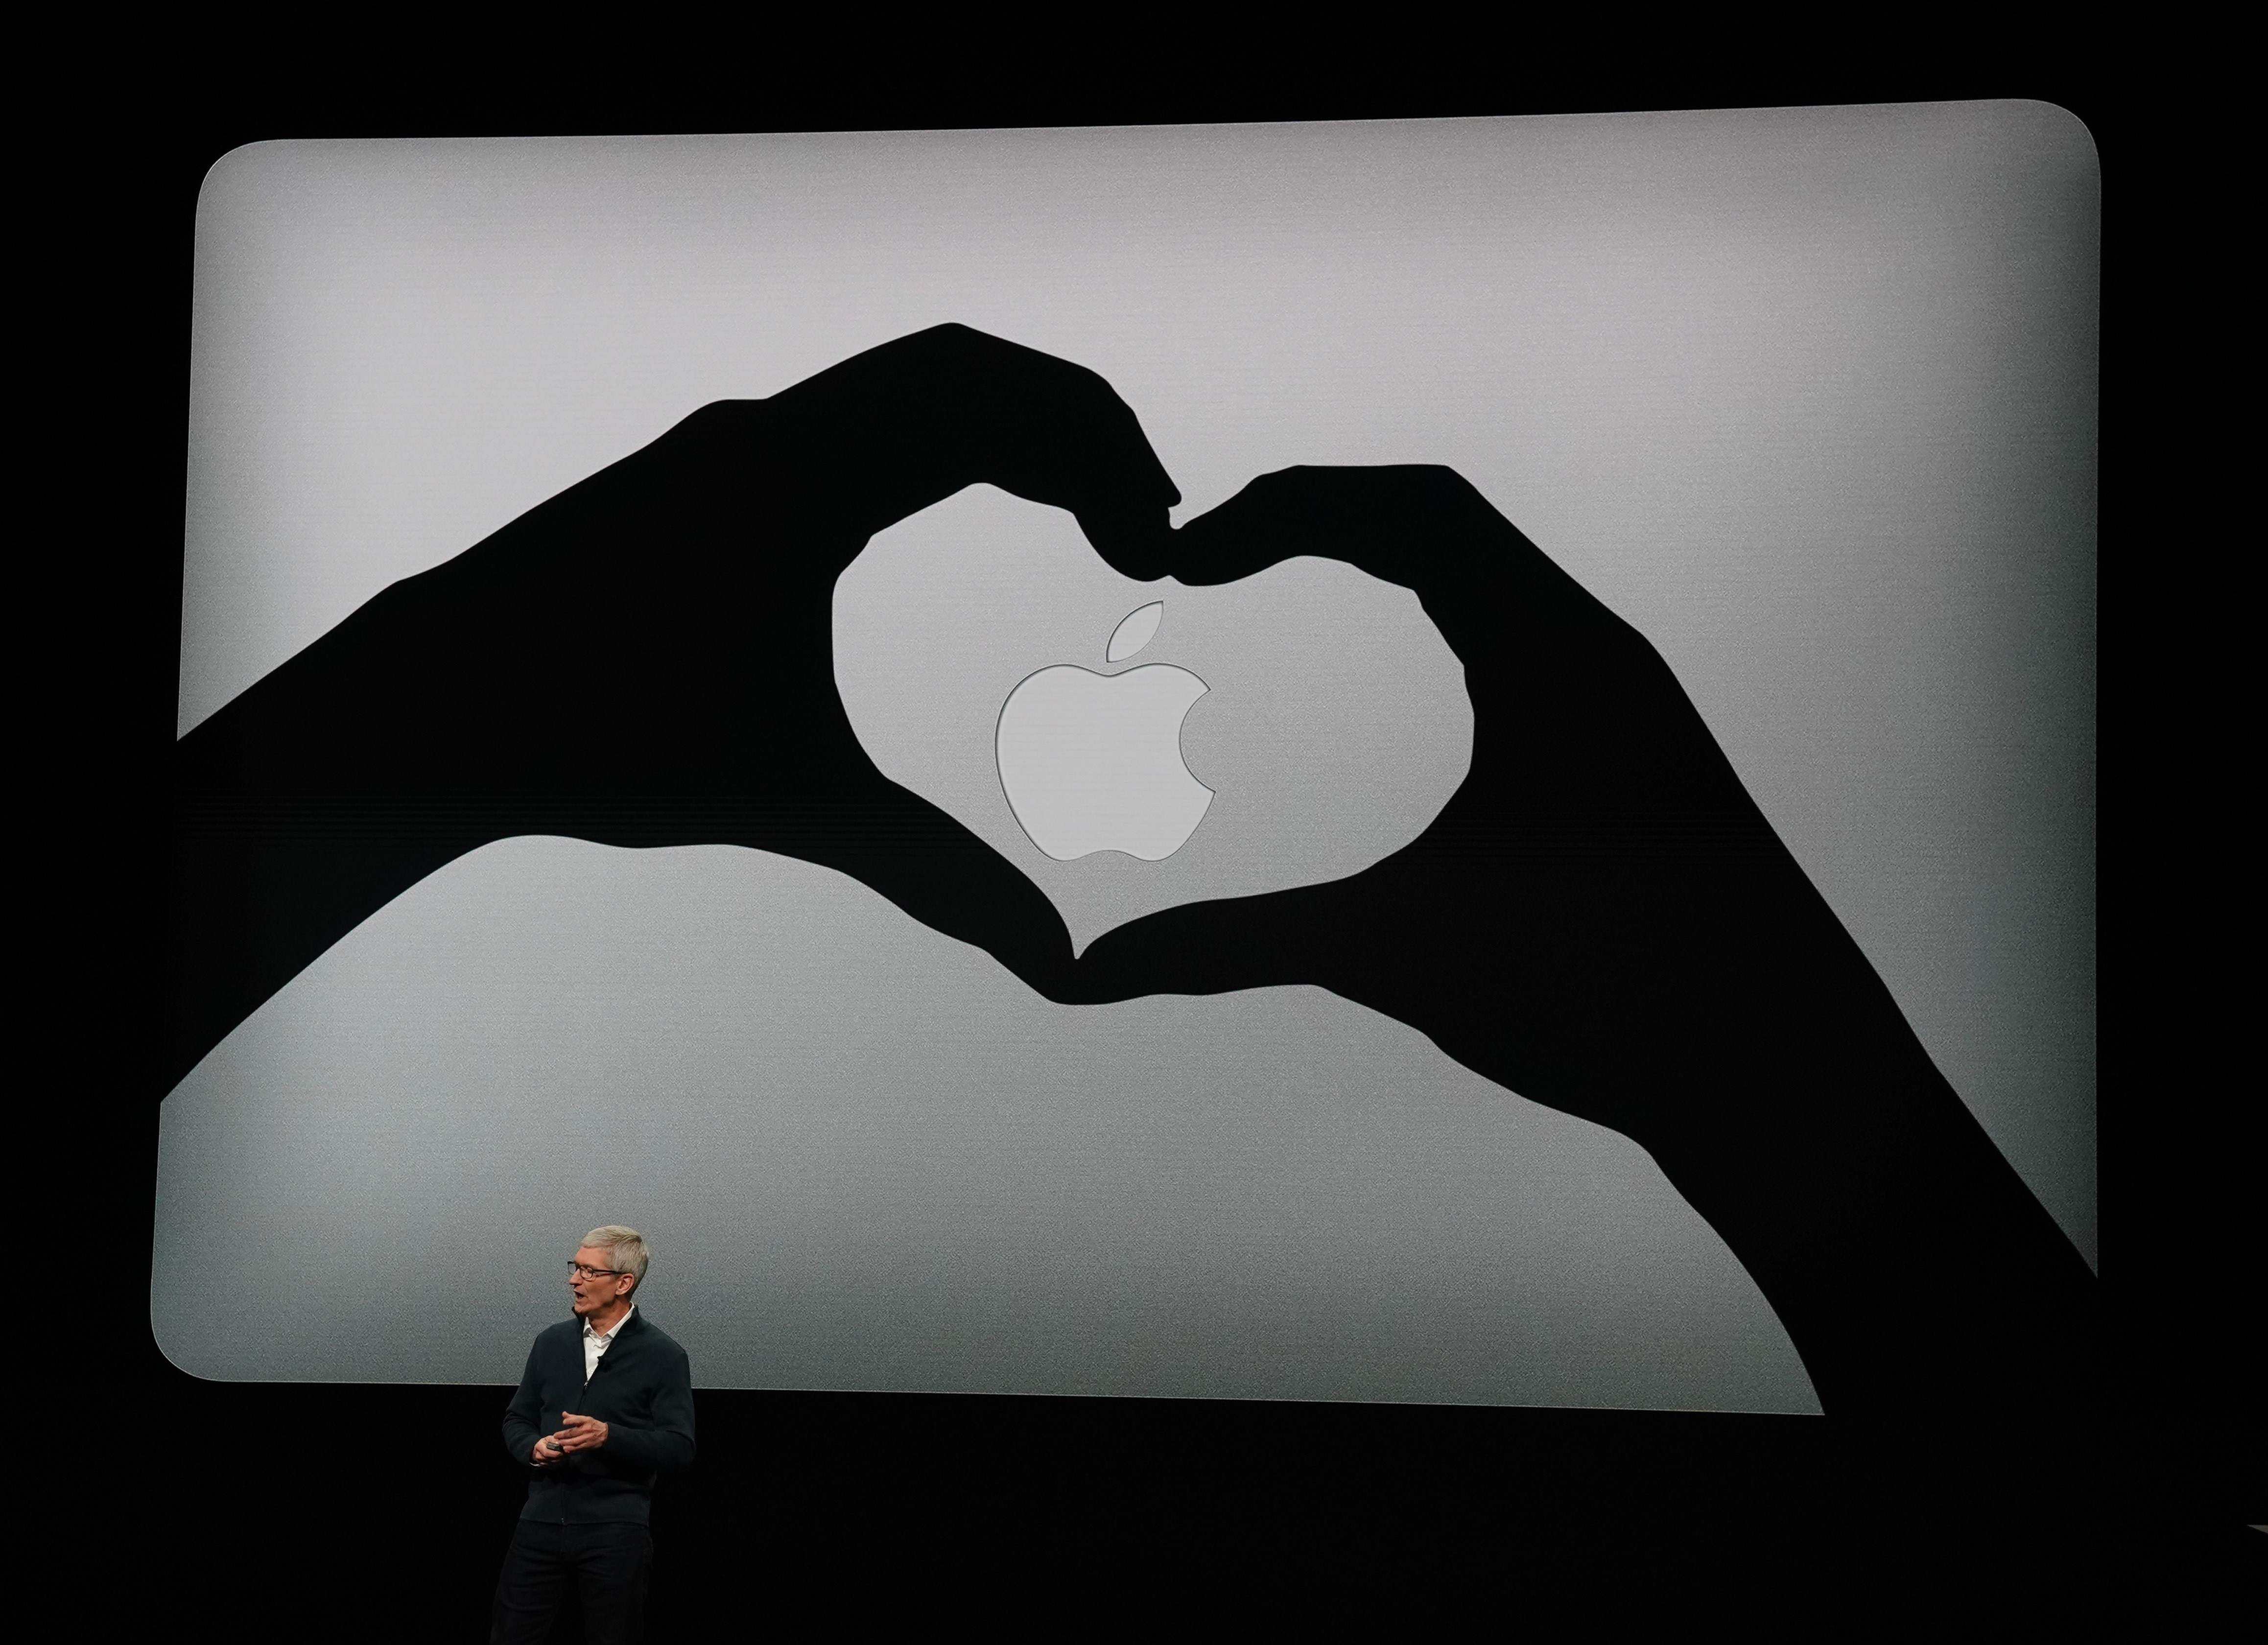 Apple CEO Tim Cook presents new products, including MacBook laptops, during an event in New York. Photo: AFP